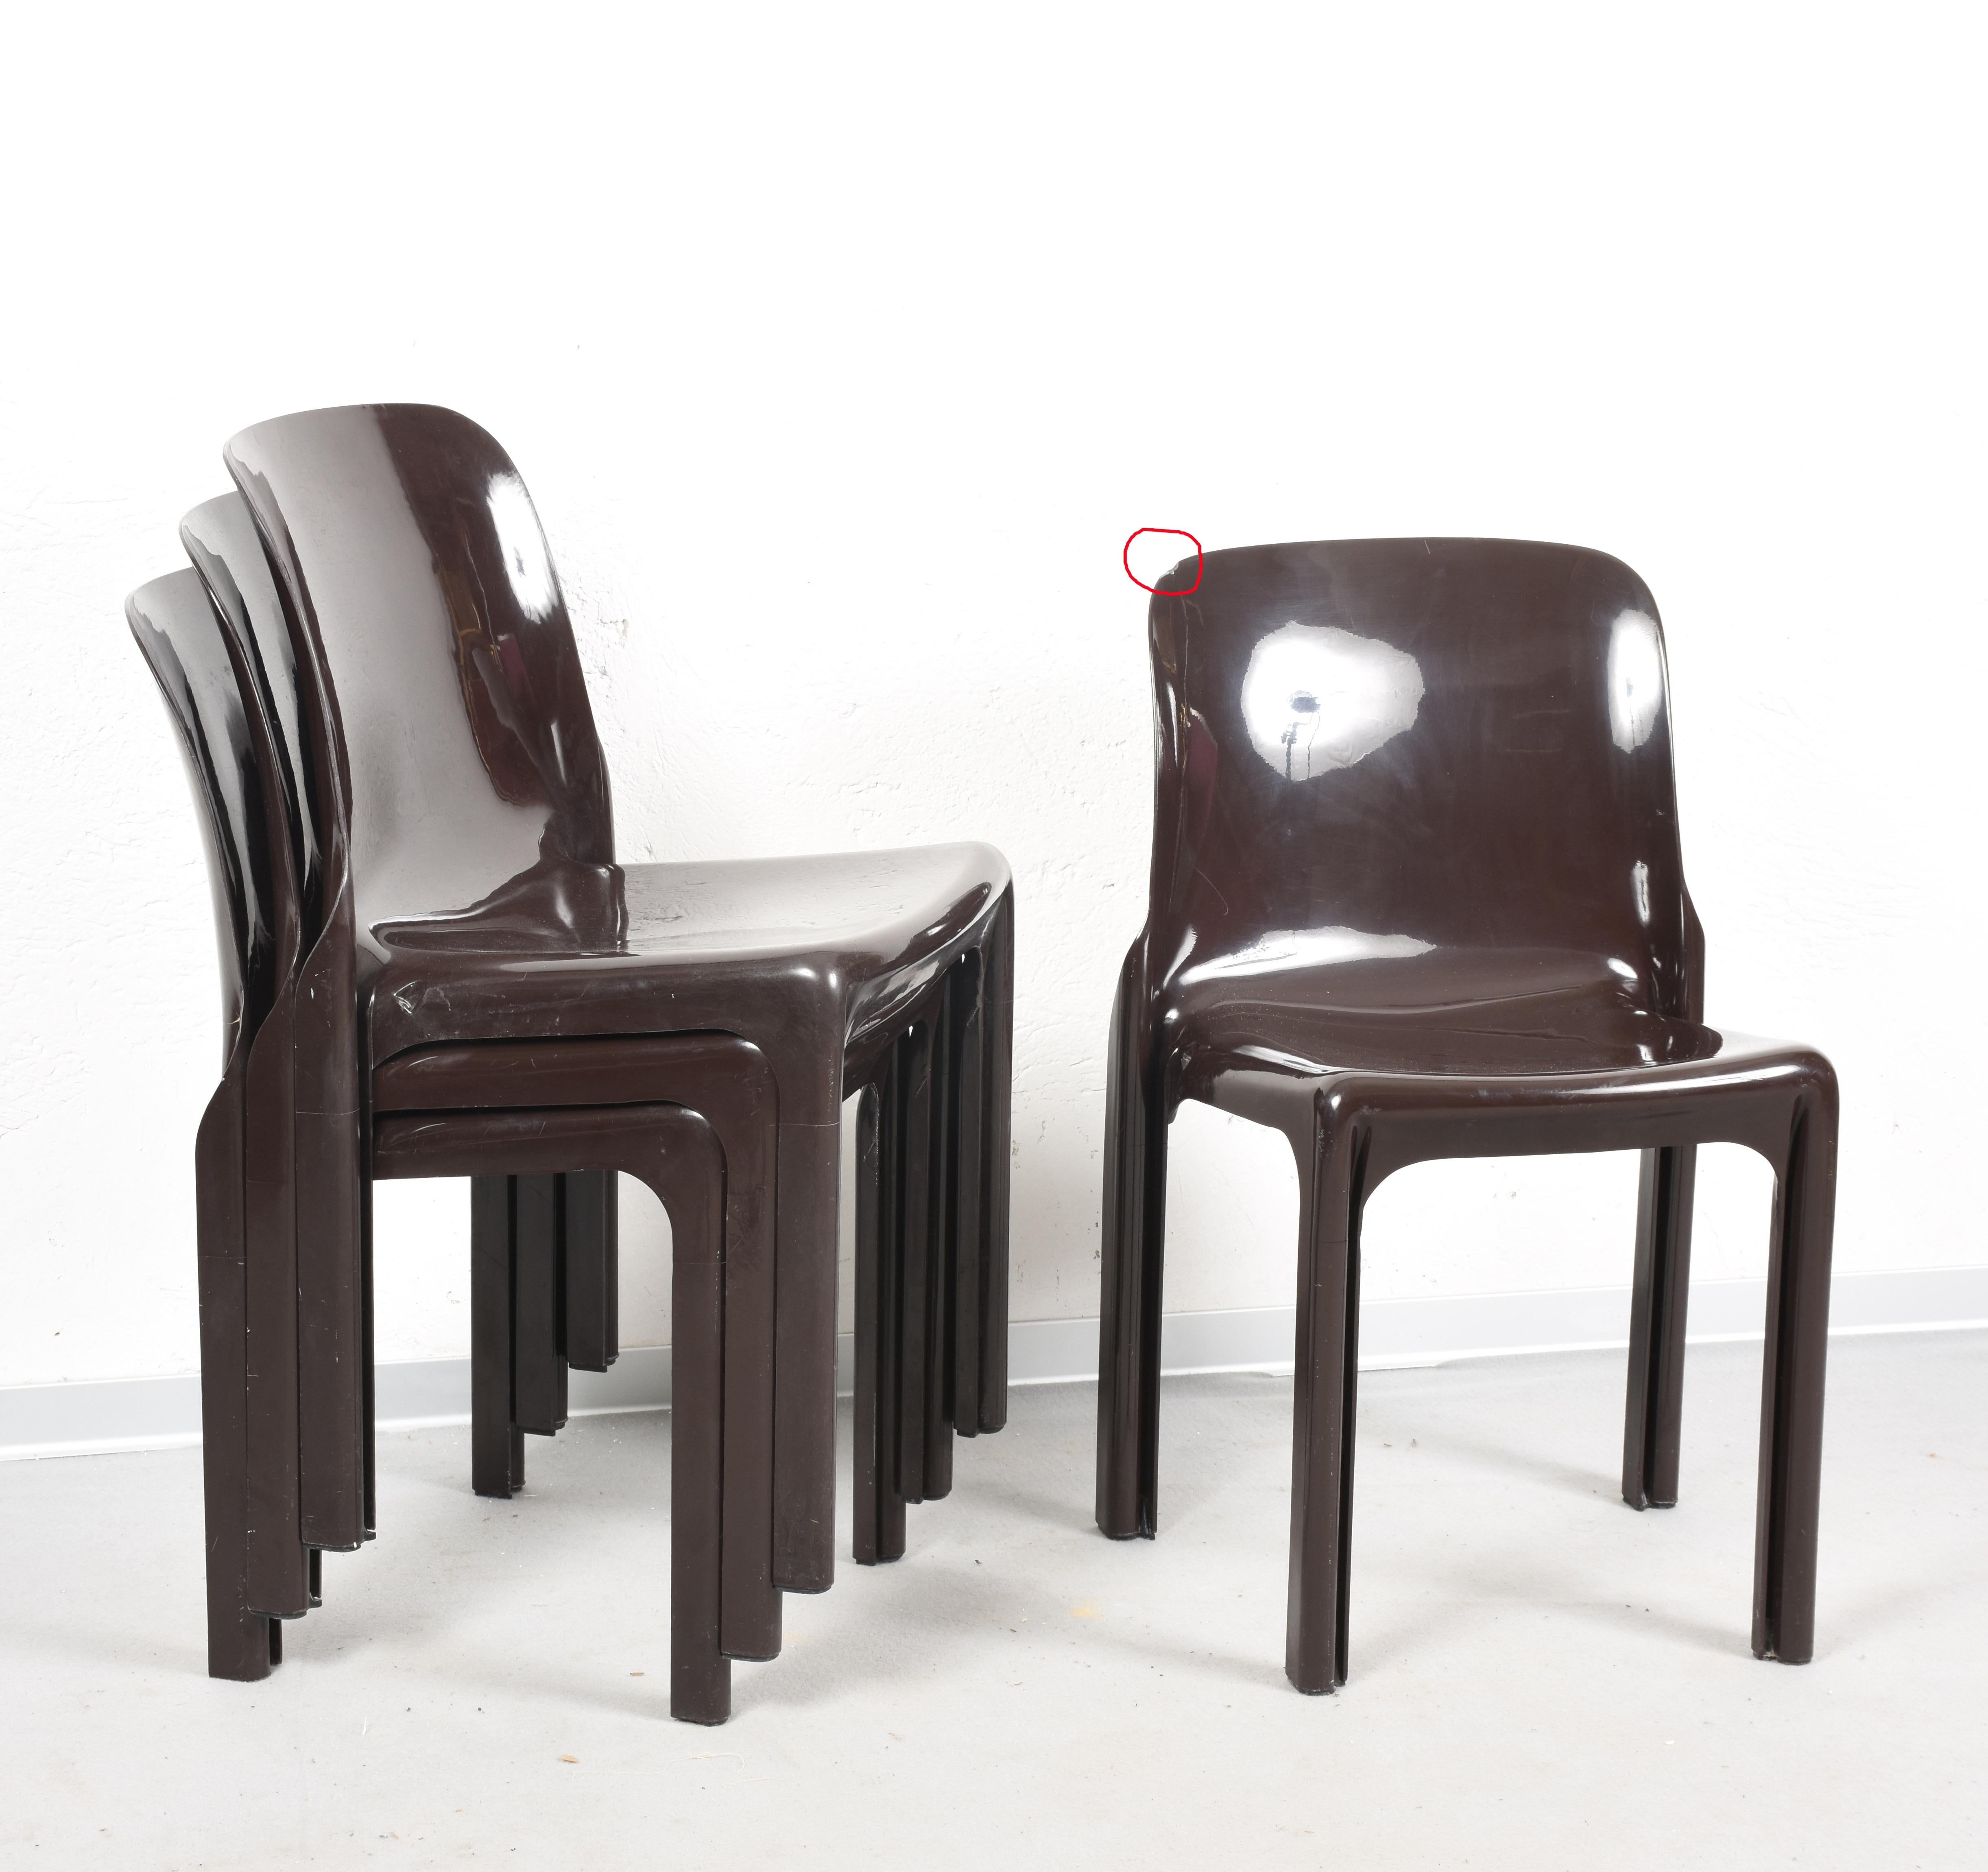 Italian Set of Four Selene Chairs Brown by Vico Magistretti for Artemide, Italy, 1960s